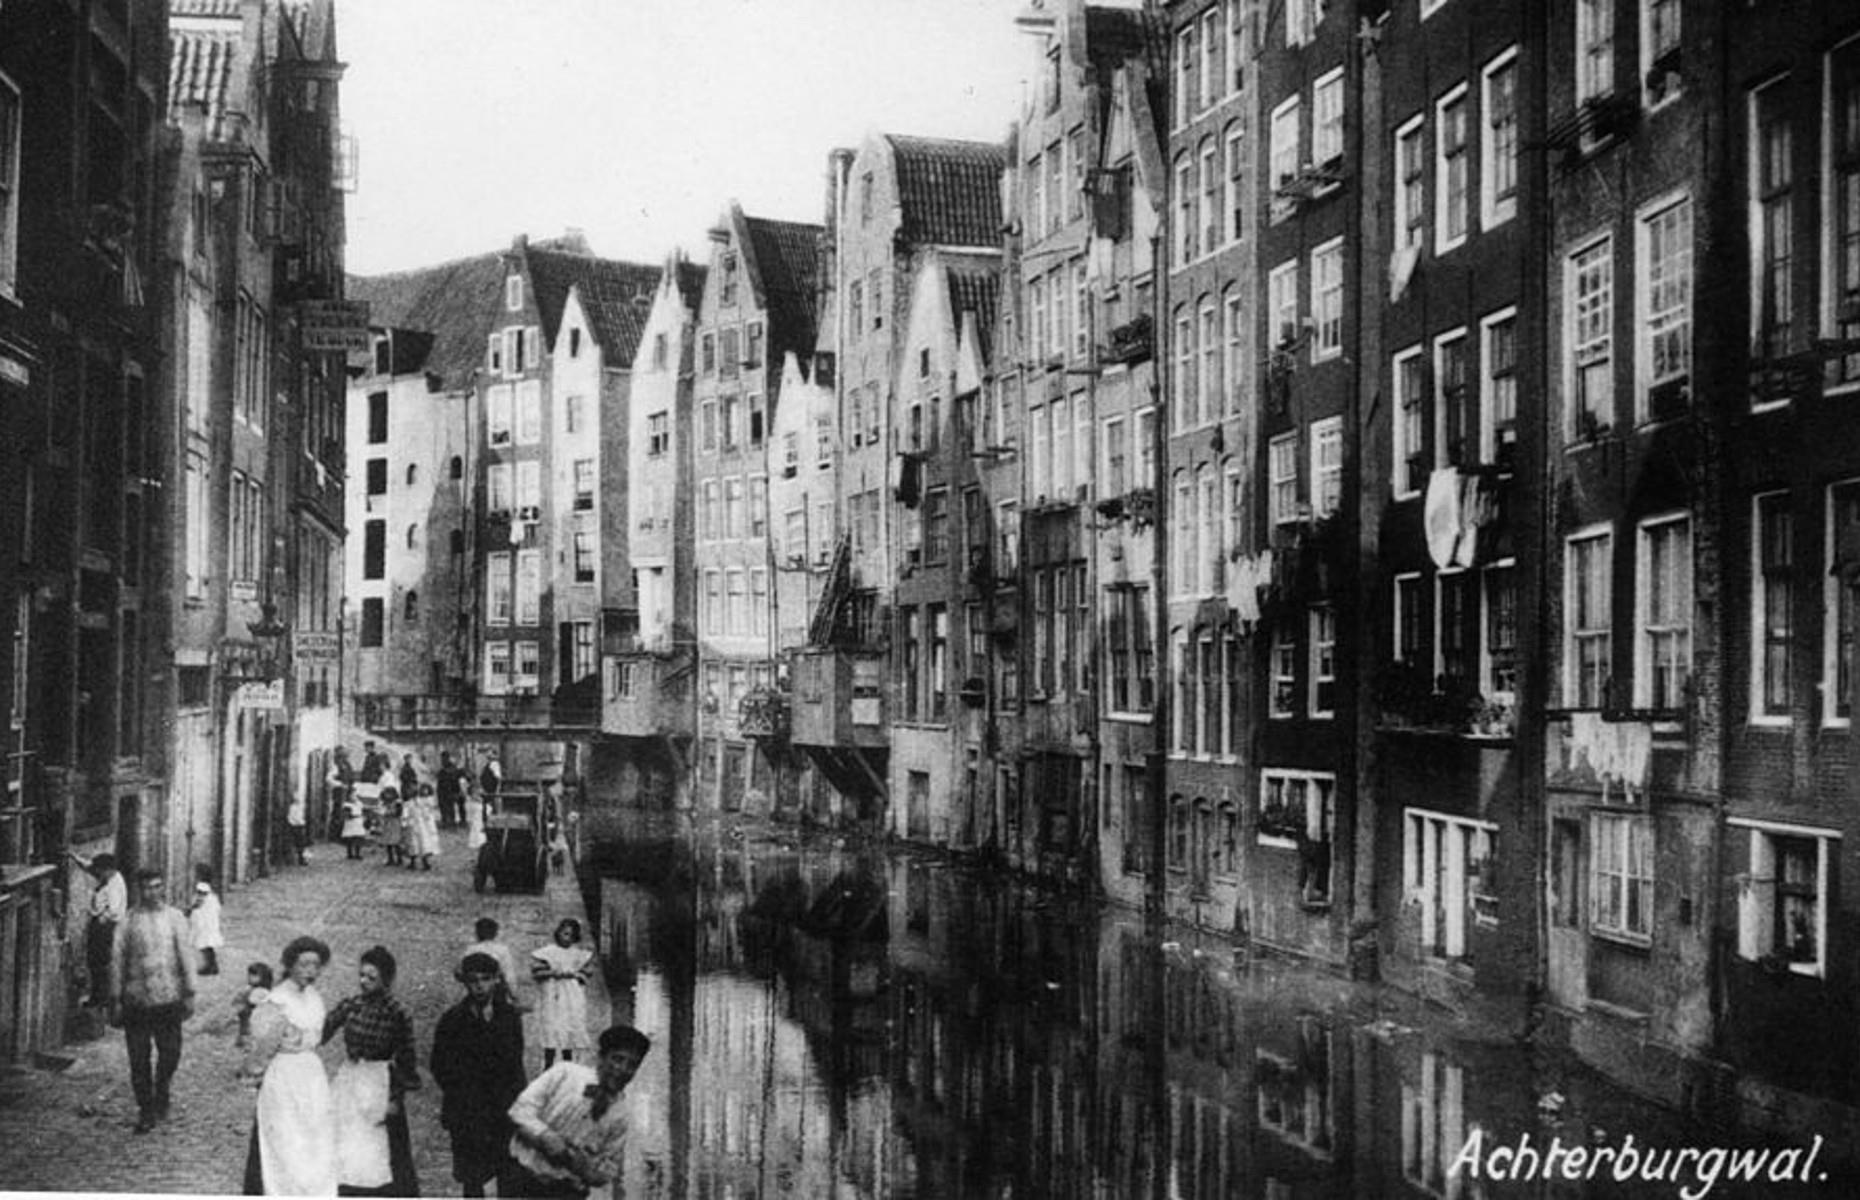 <p>The picturesque canals and colorful merchant houses of Amsterdam may be Instagram-friendly today, but back when this photo was taken in 1890, the famous city was spiraling into decline. The Dutch Golden Age of the 17th and 18th centuries was well and truly over and international conflicts with England and France were taking their toll. Thankfully the arrival of railways and the opening of new museums at the start of the 20th century put the city back on the path to the prosperity it enjoys today.</p>